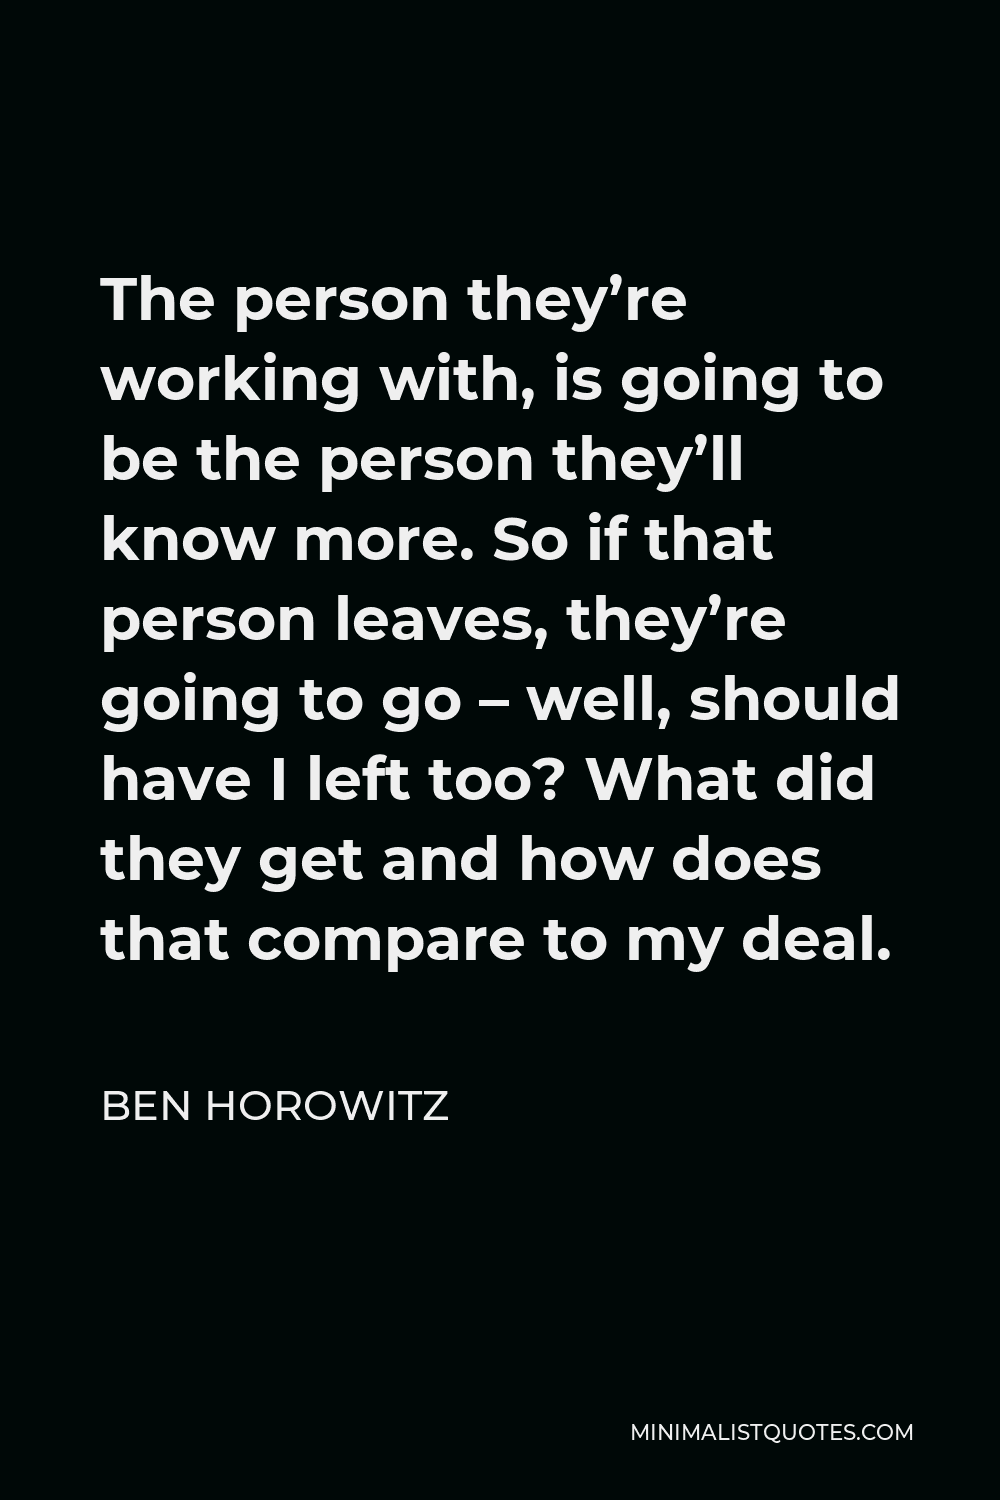 Ben Horowitz Quote - The person they’re working with, is going to be the person they’ll know more. So if that person leaves, they’re going to go – well, should have I left too? What did they get and how does that compare to my deal.